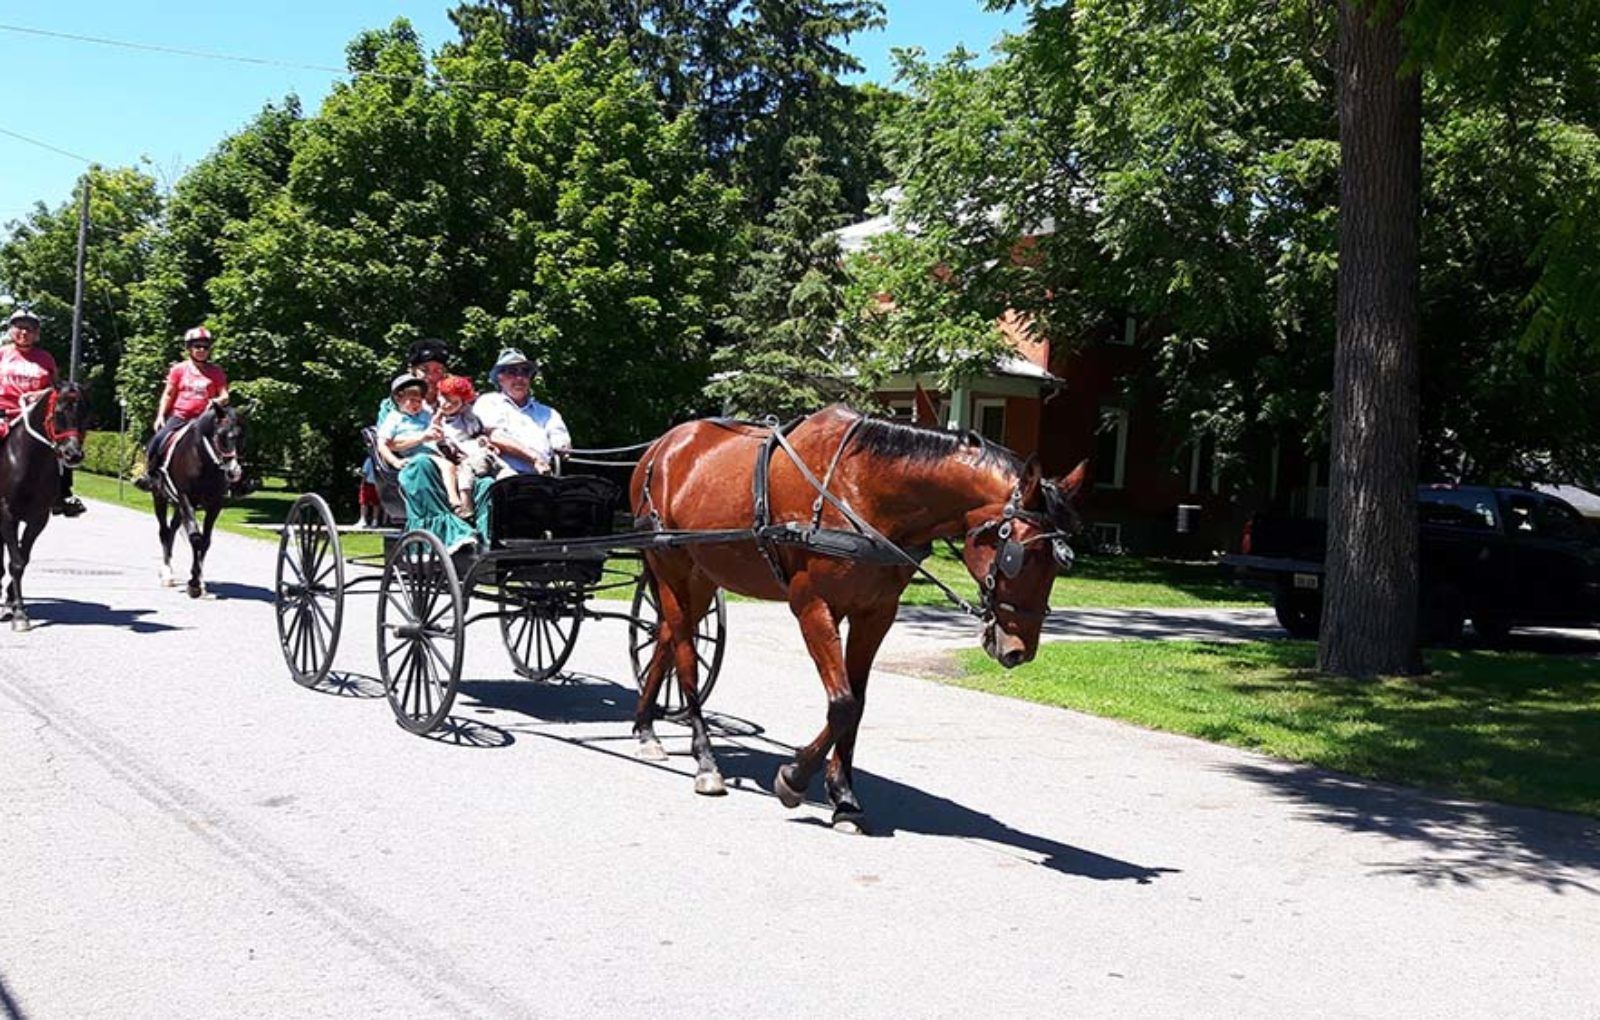 LS_July 10 2019 Horse and Buggy Parade (28)